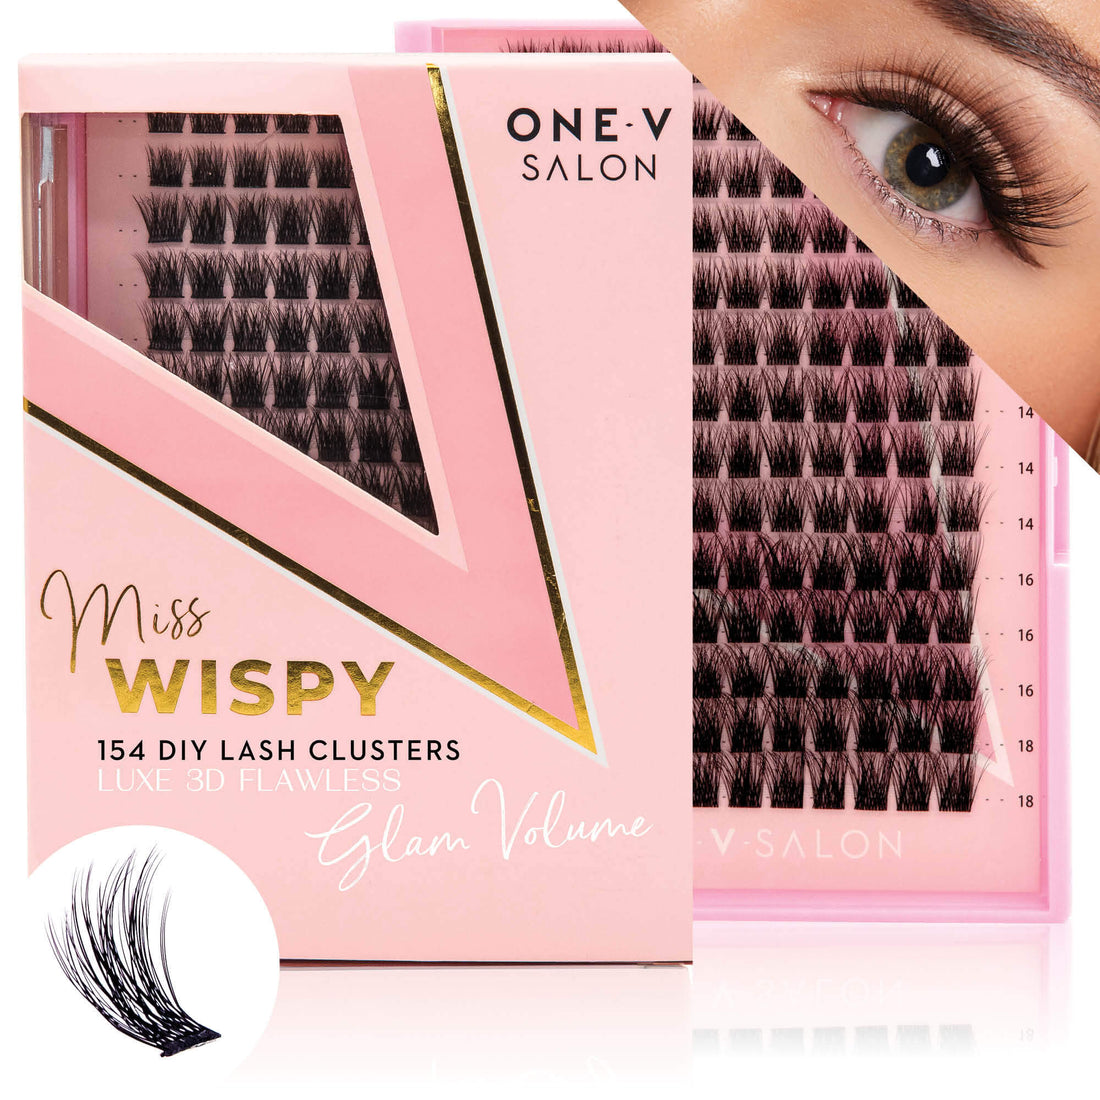 Luxe 3D Flawless -Glam Volume - 154 DIY Cluster Lashes - LASH V